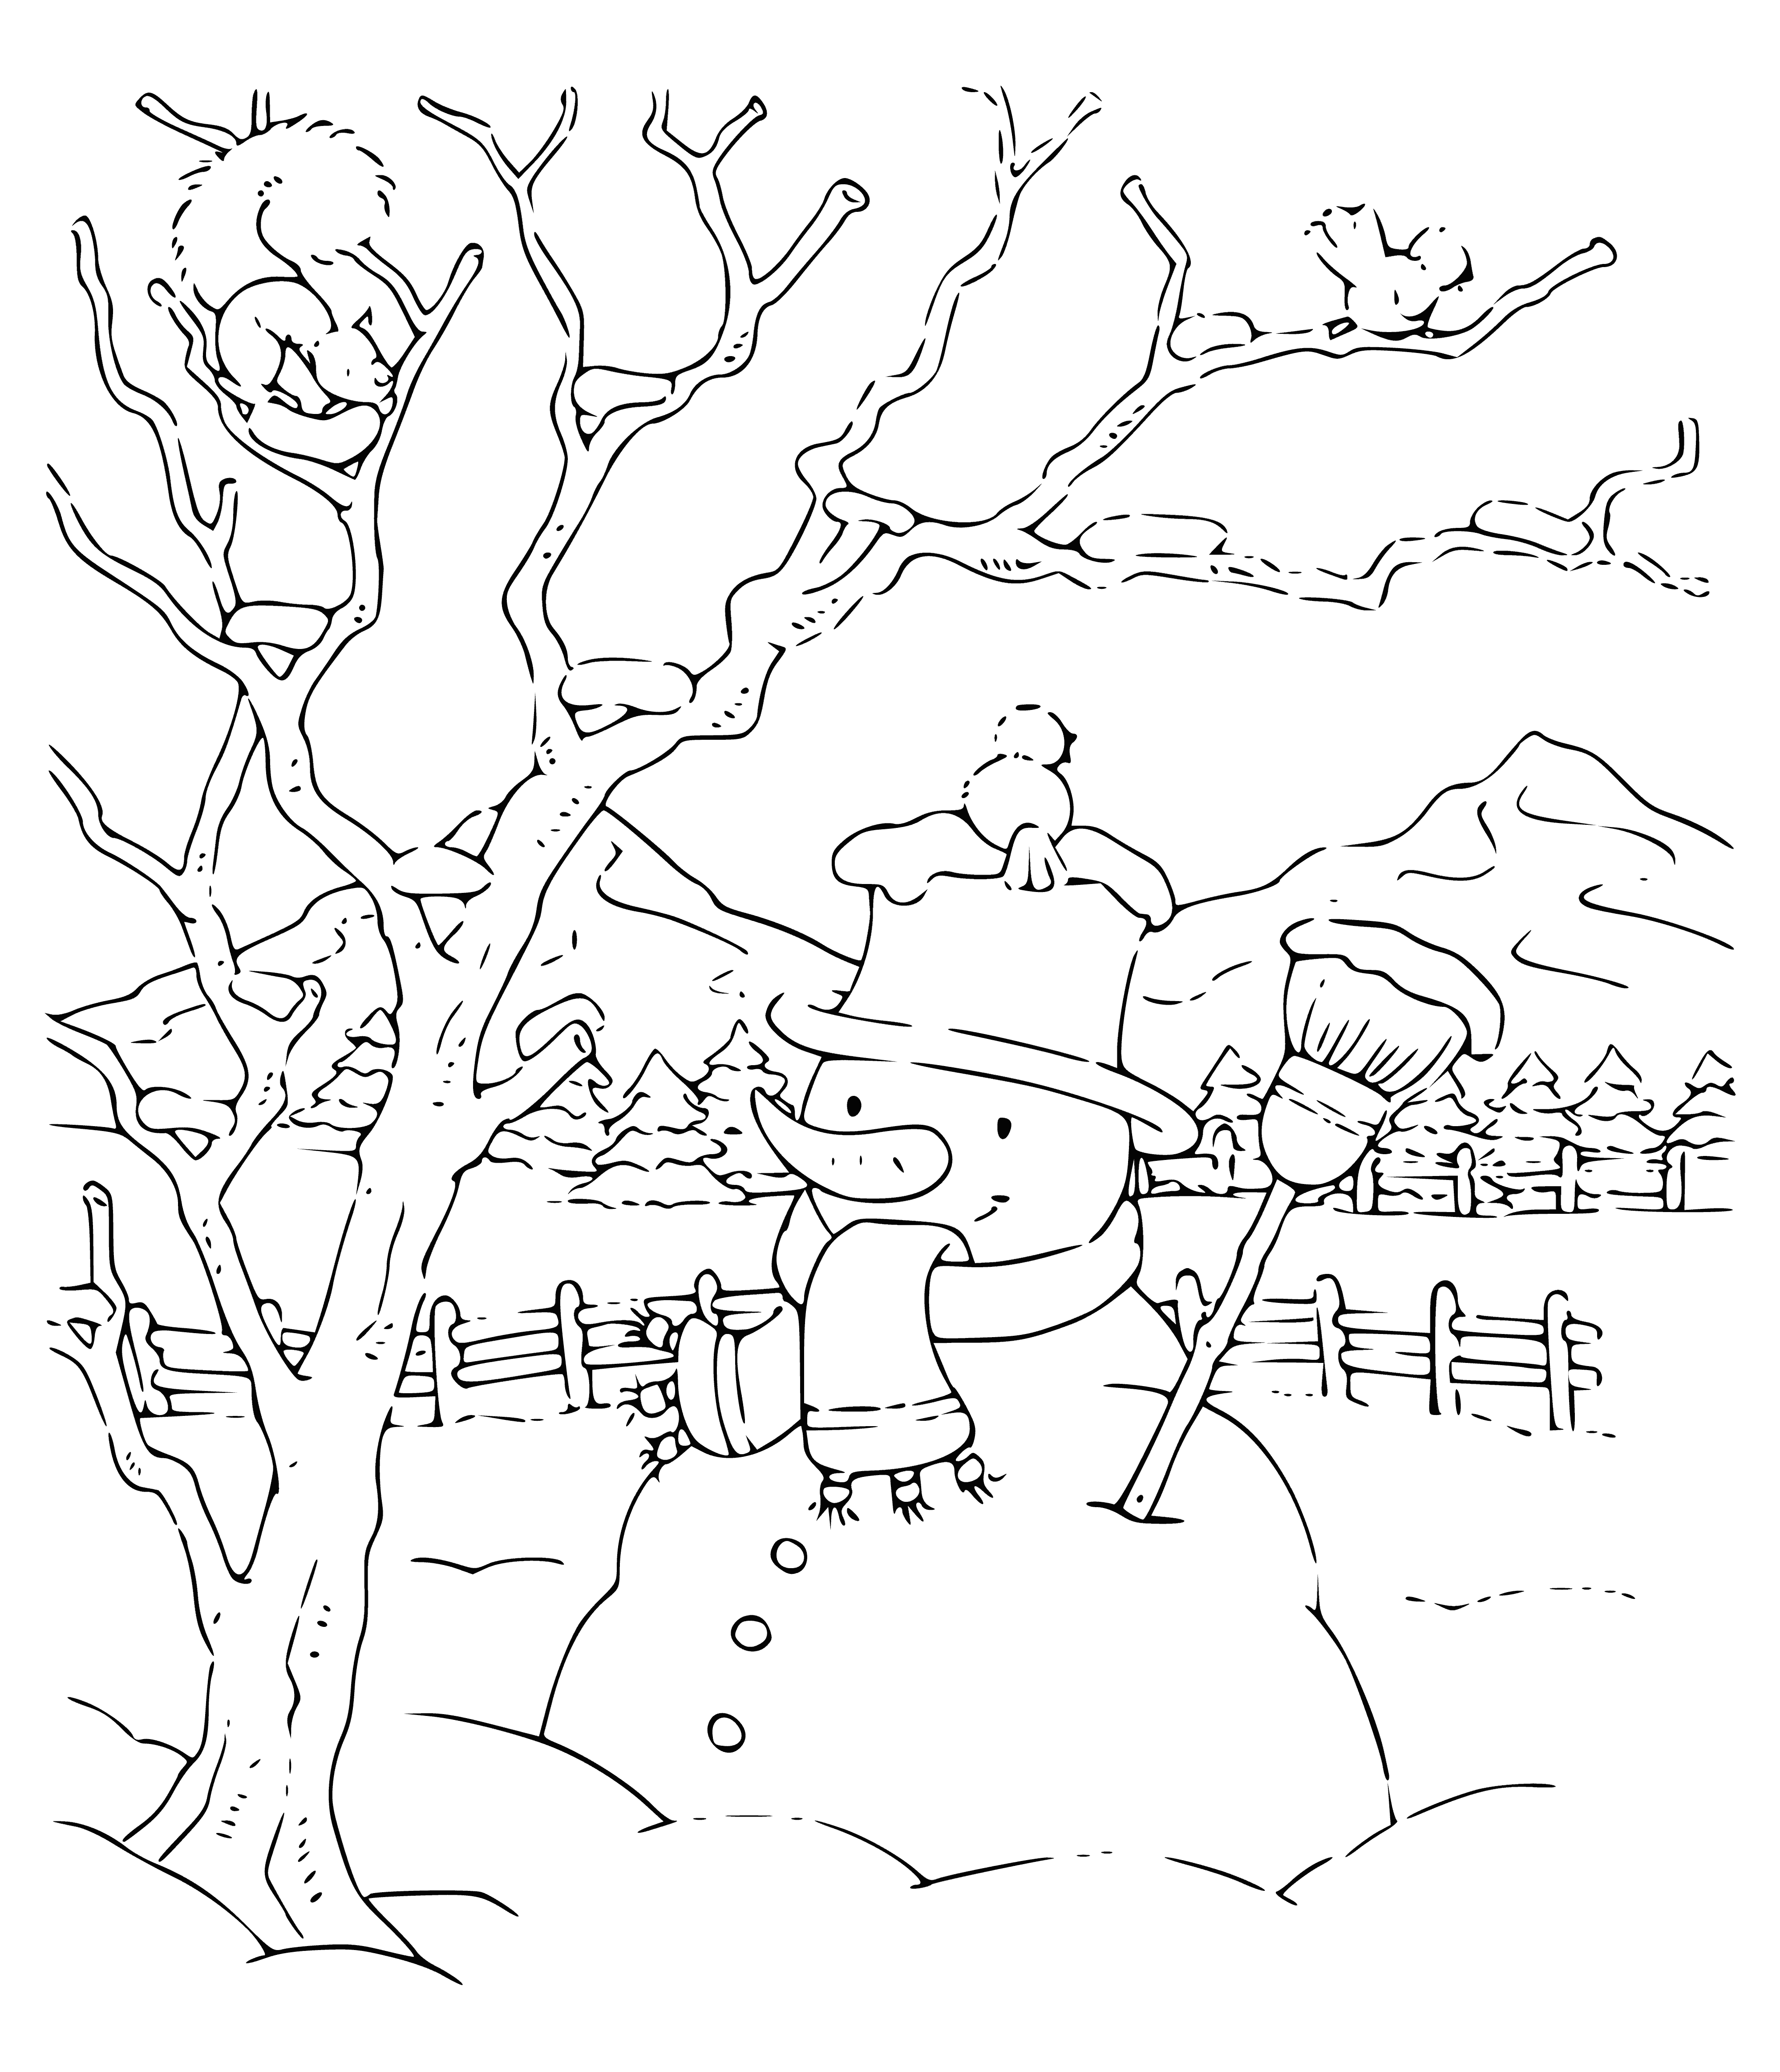 coloring page: Snowman in red & white scarf & hat, eyes of coal, singing & holding scarf. Warm & cheerful winter scene!